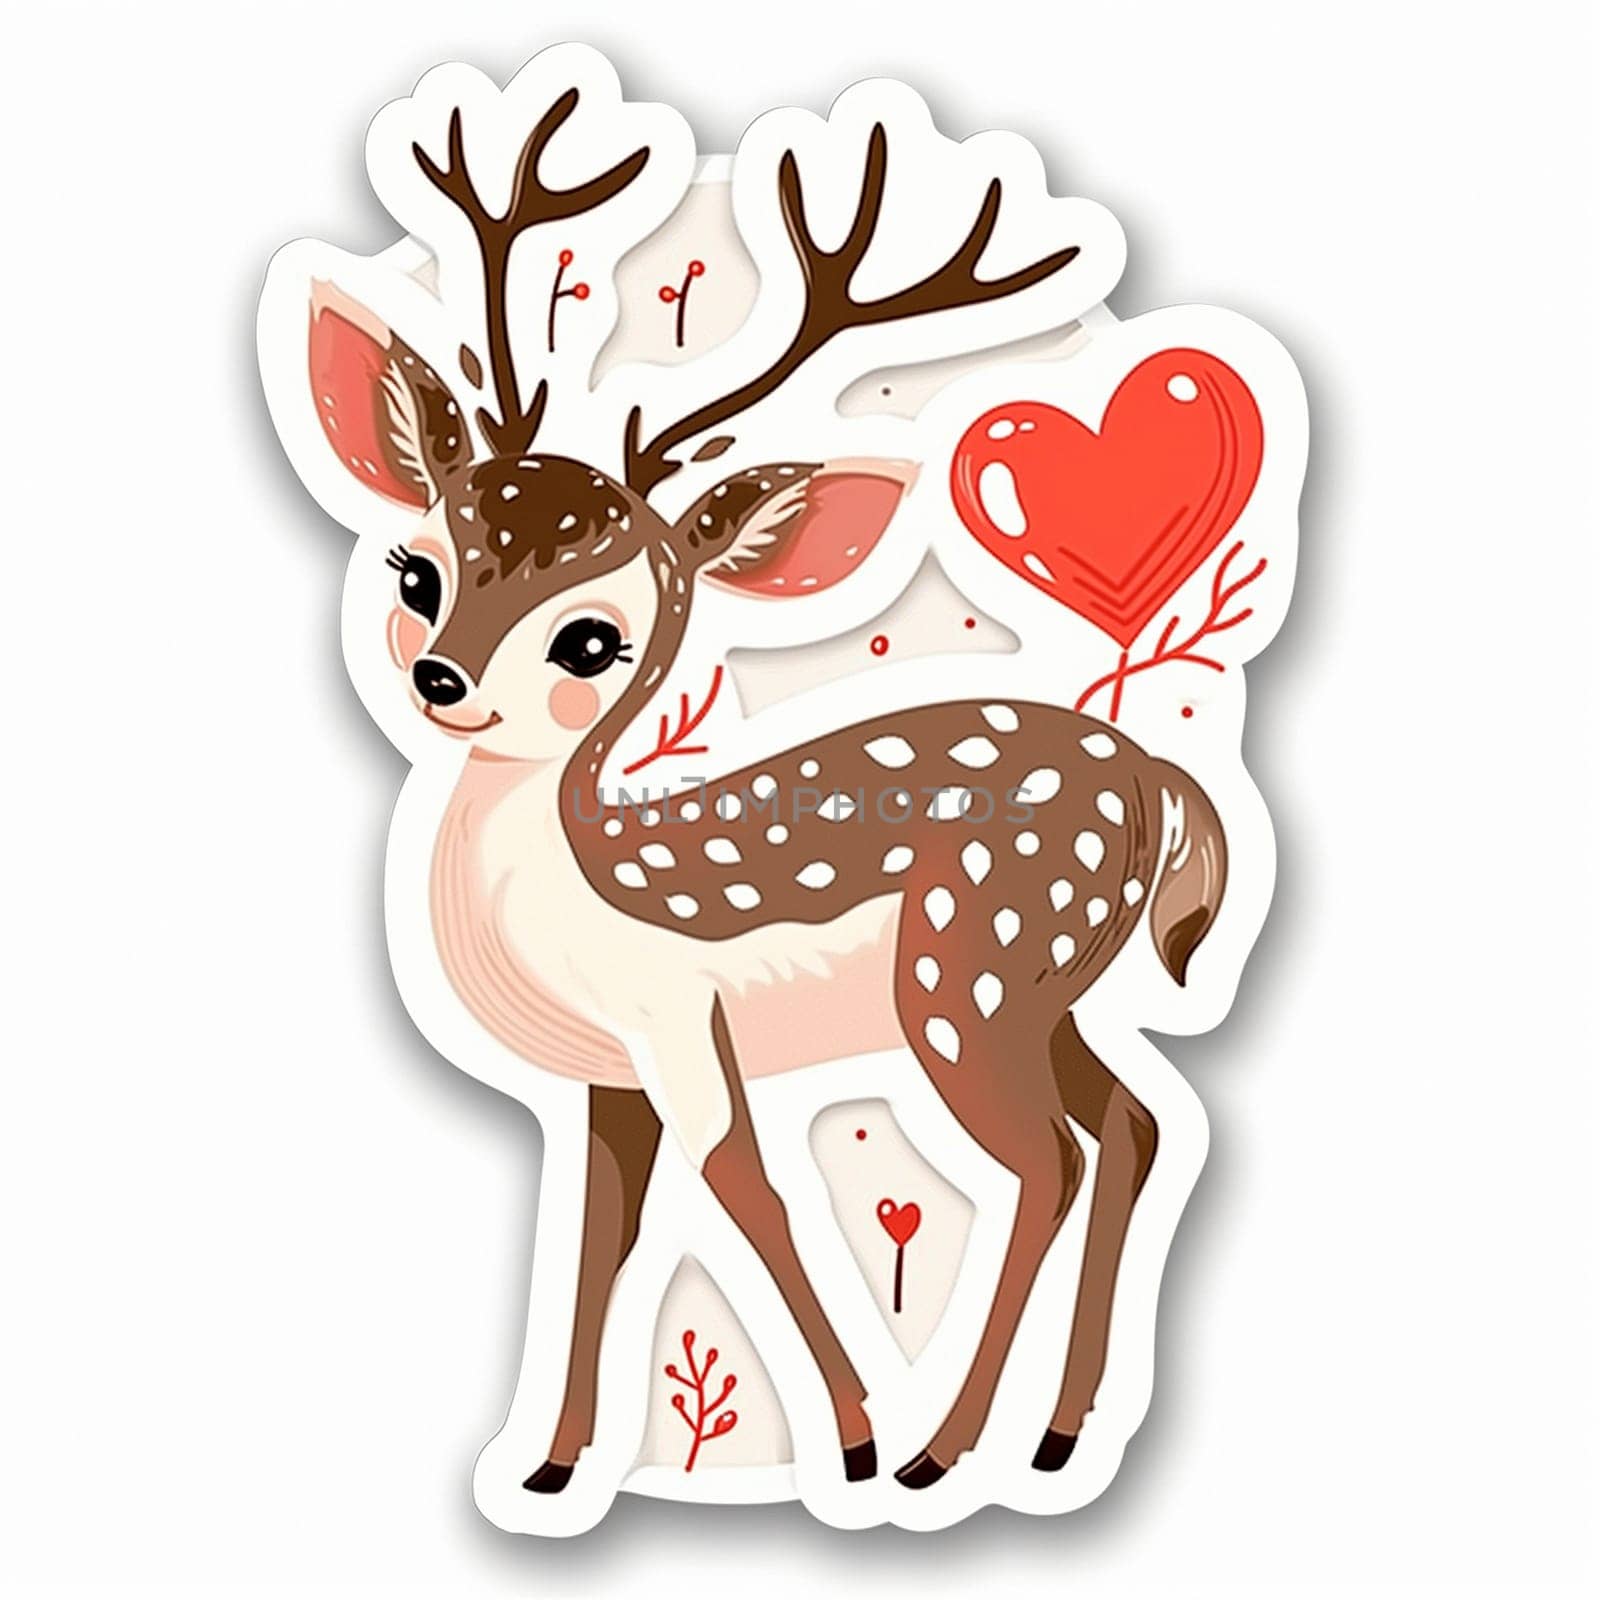 A cute fawn casual icon by NeuroSky